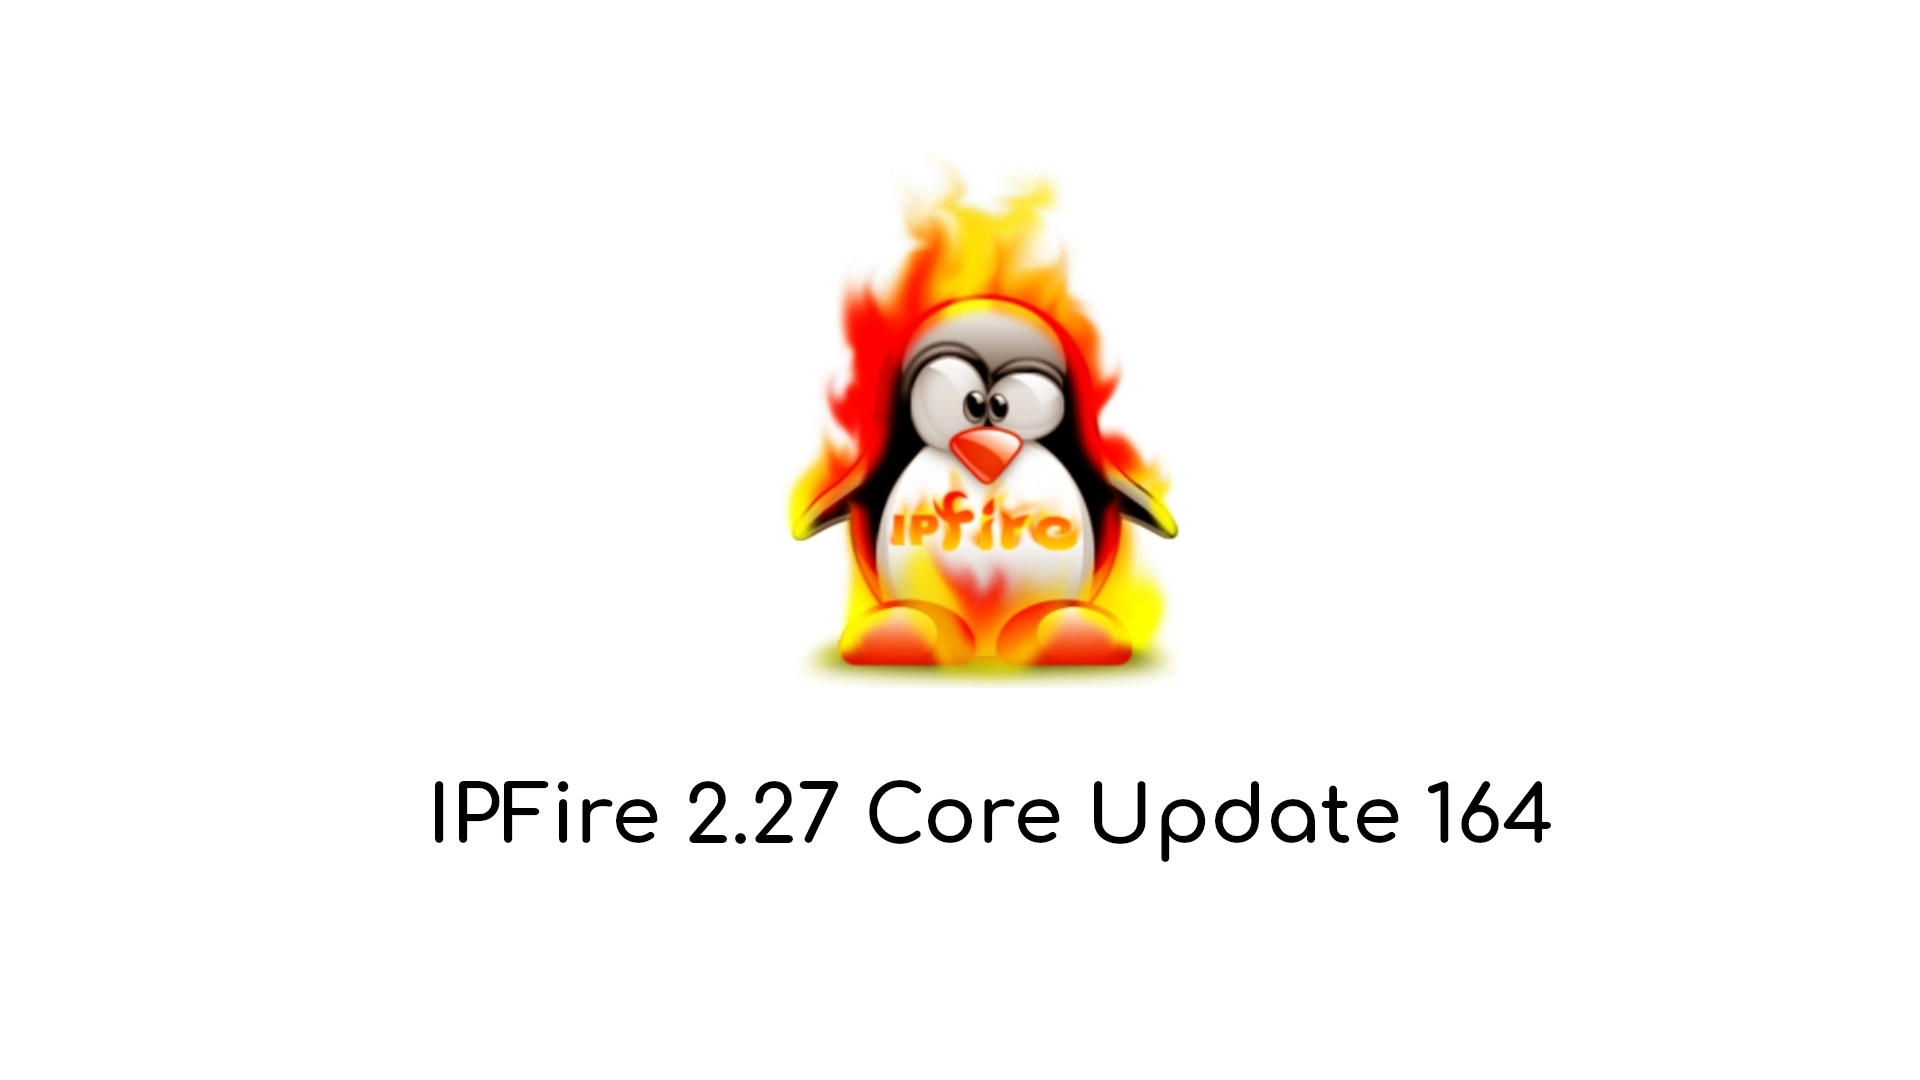 IPFire Hardened Open-Source Linux Firewall Is Now Powered by Linux Kernel 5.15 LTS